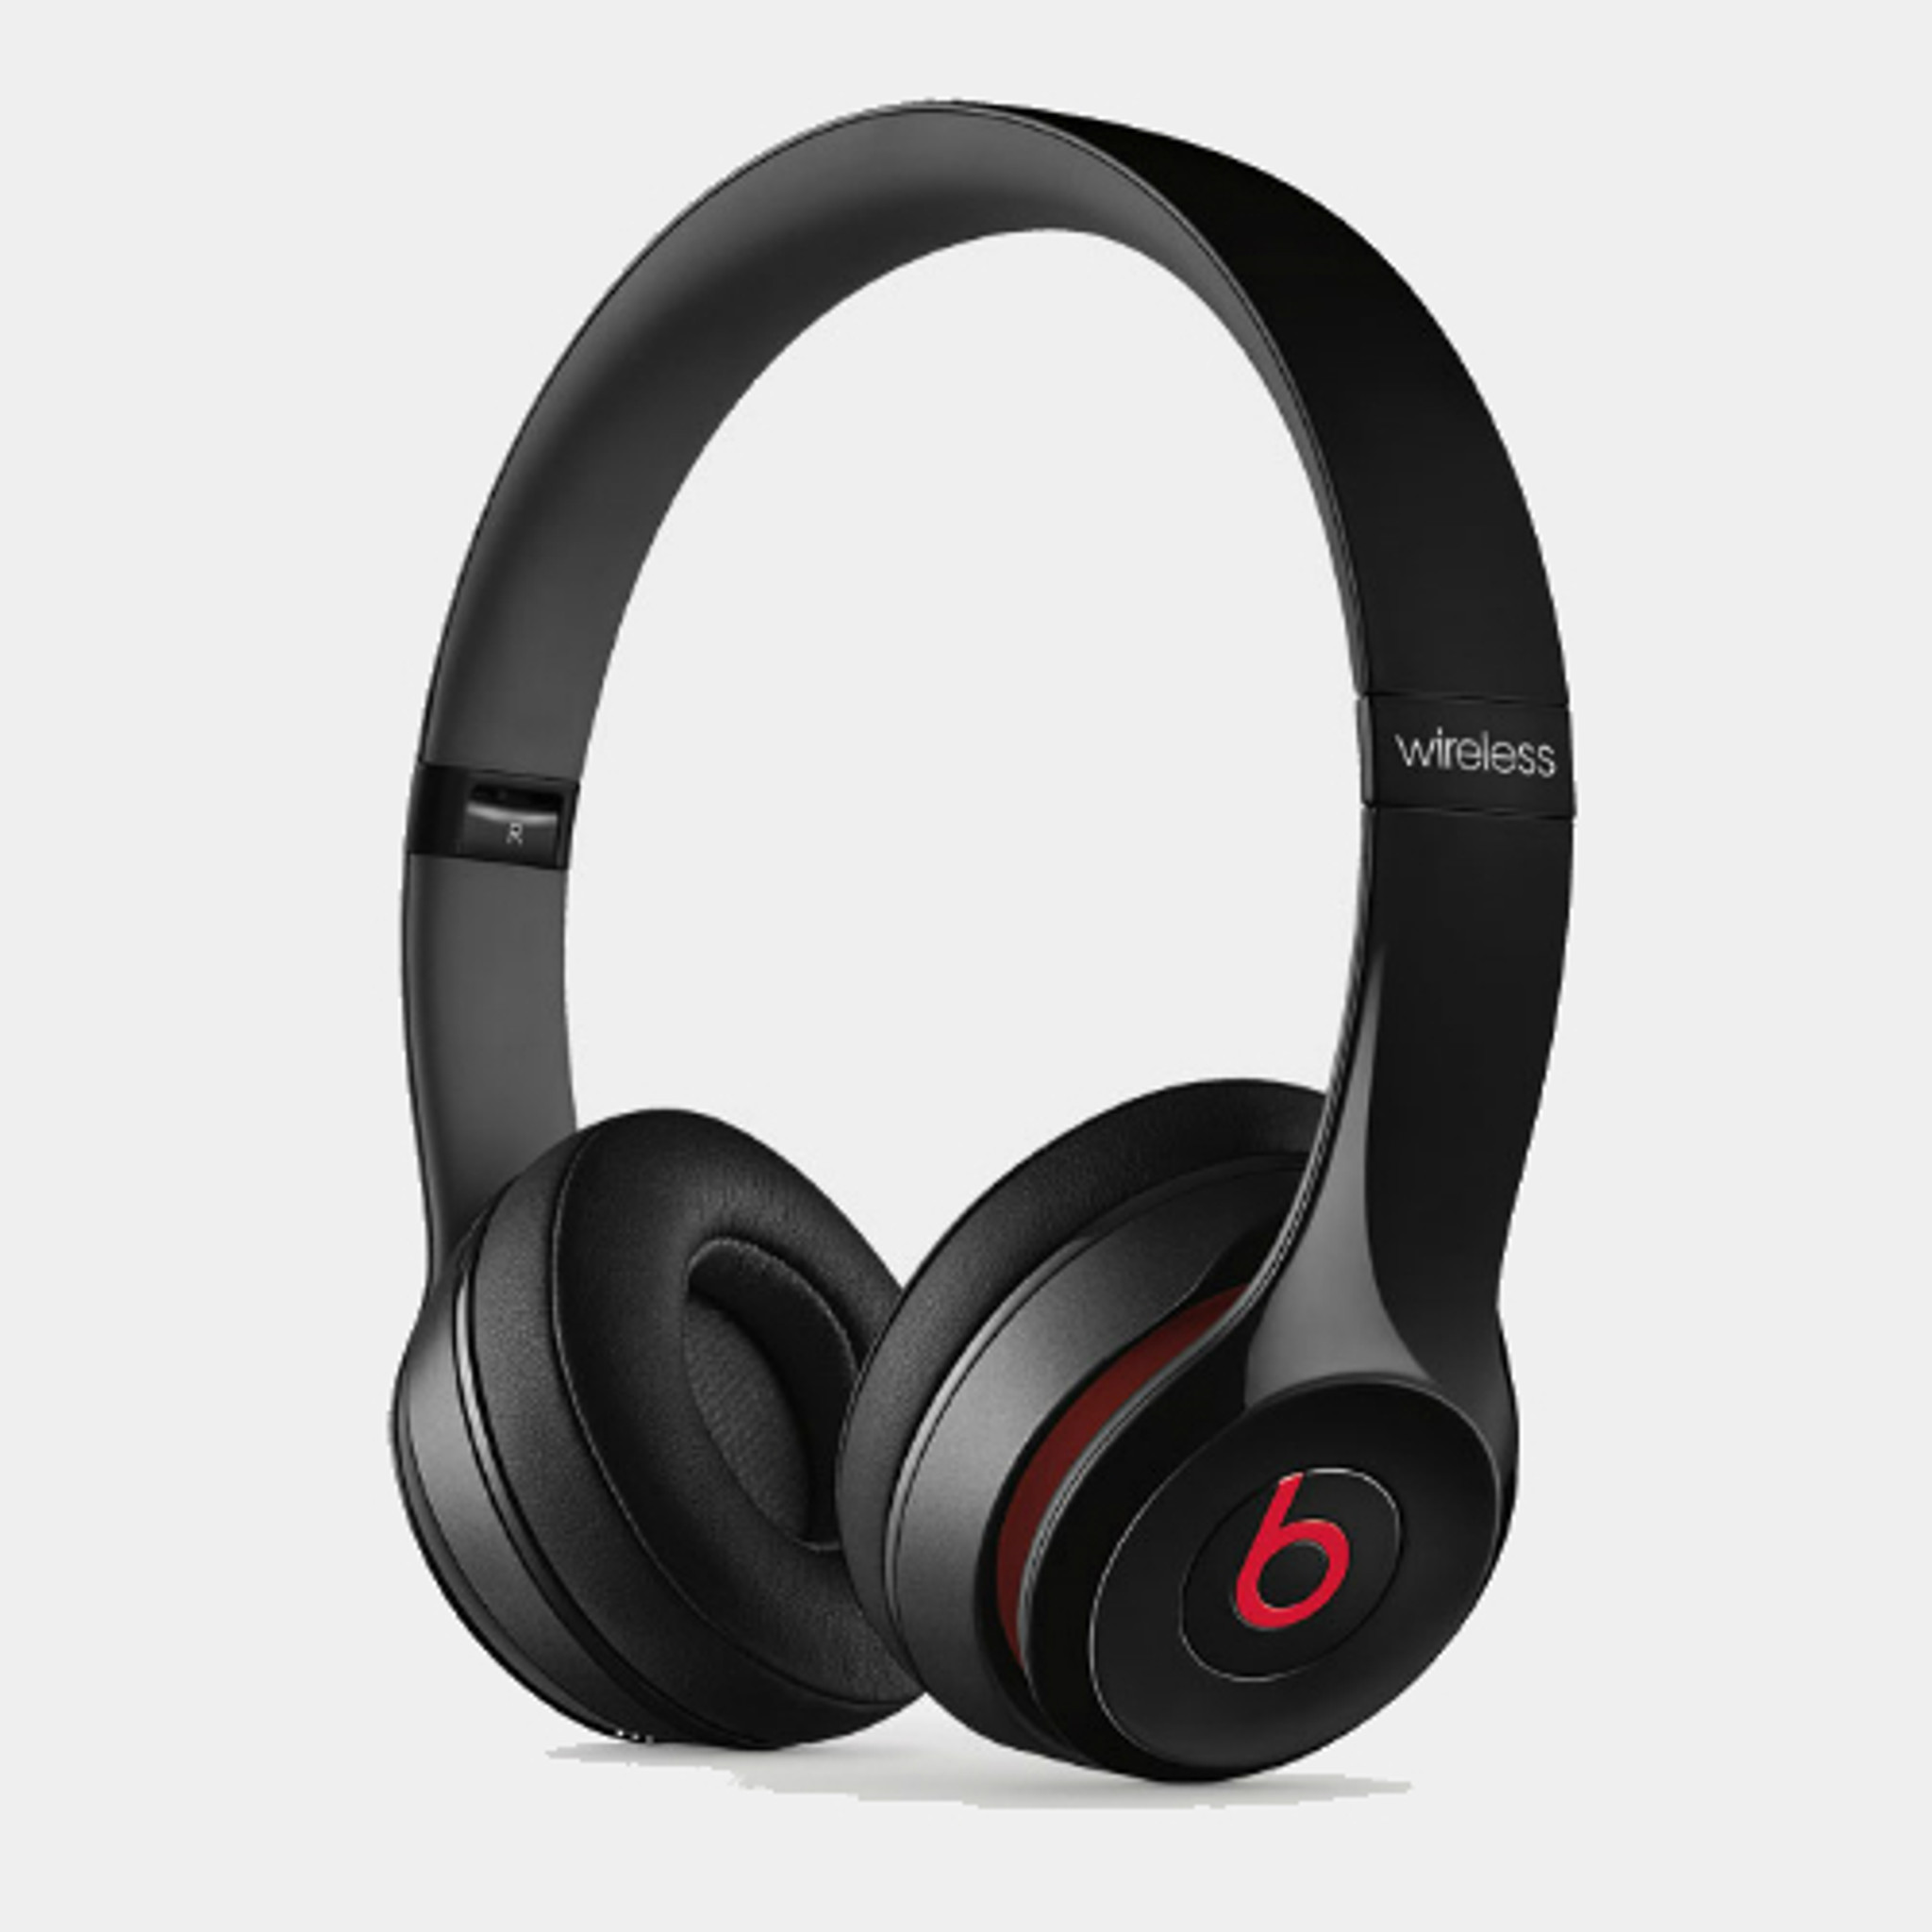 Beats Solo2 Wireless The Wireless Age (a Division of IM Wireless  Communications Ltd.)